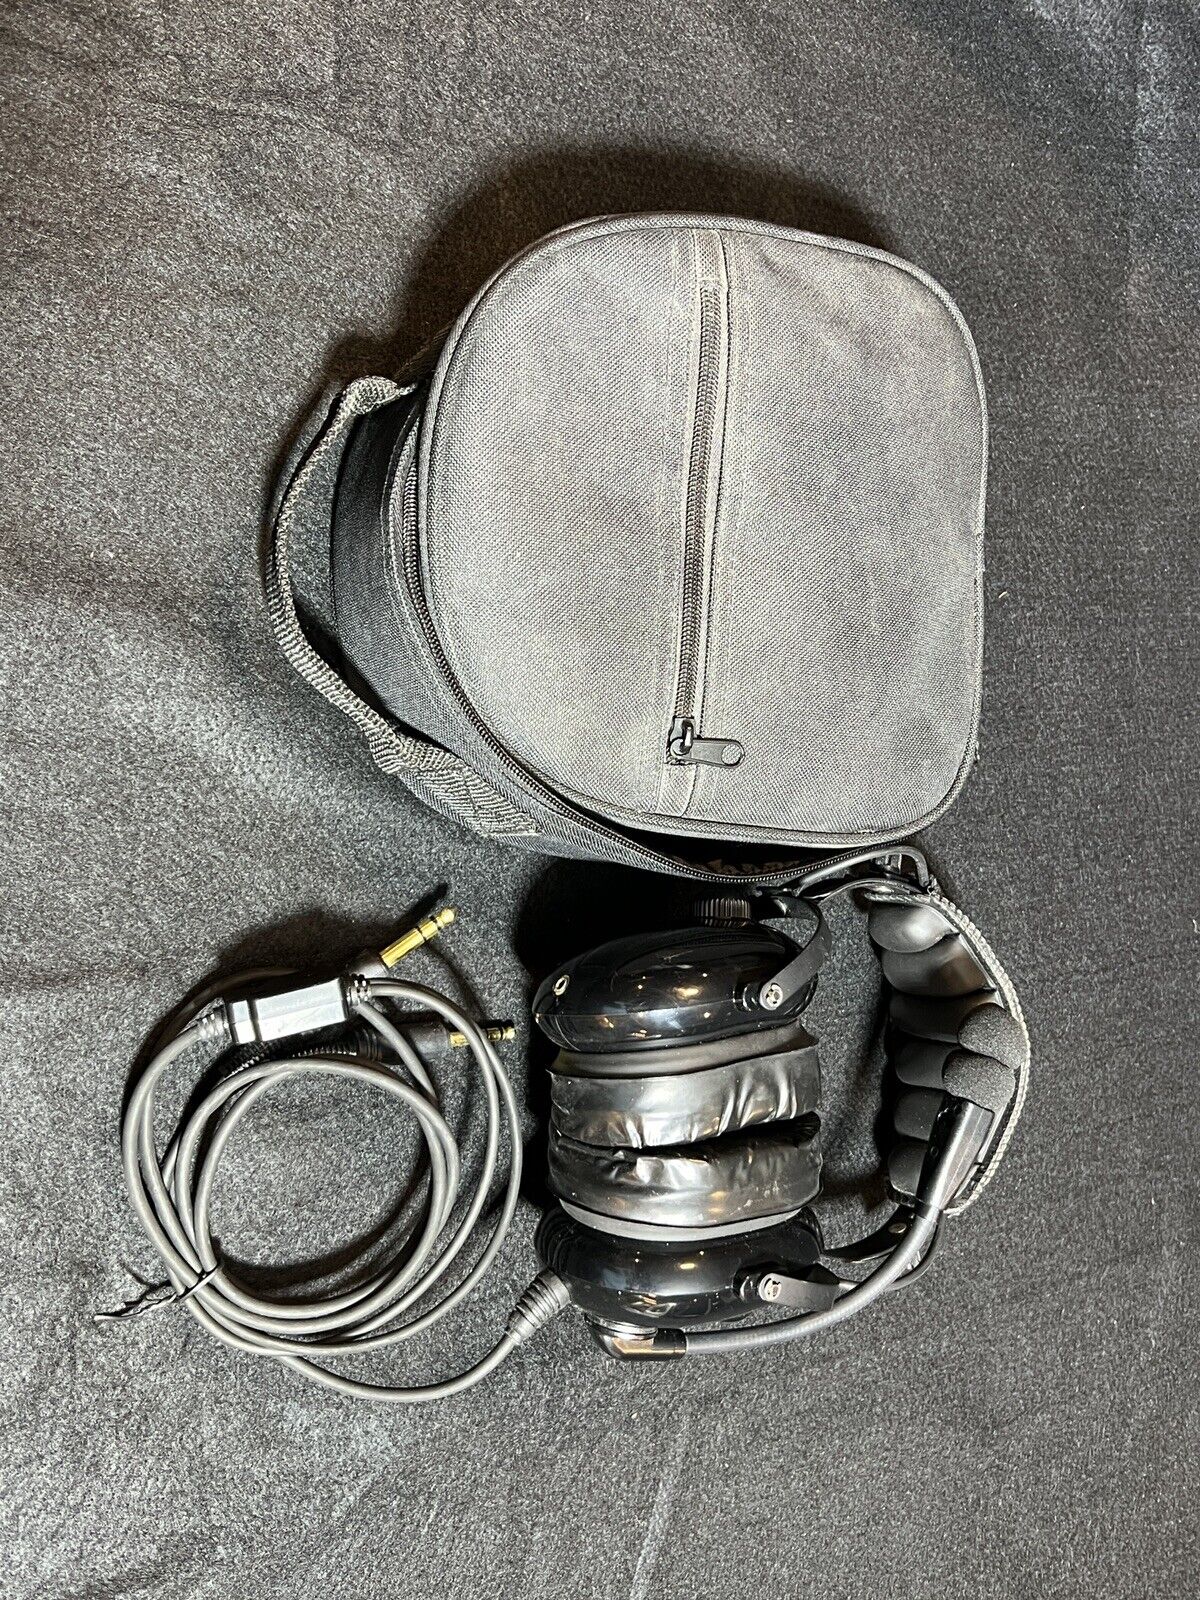 New KORE AVIATION KA-1 General Aviation Headset for Pilots Used Once